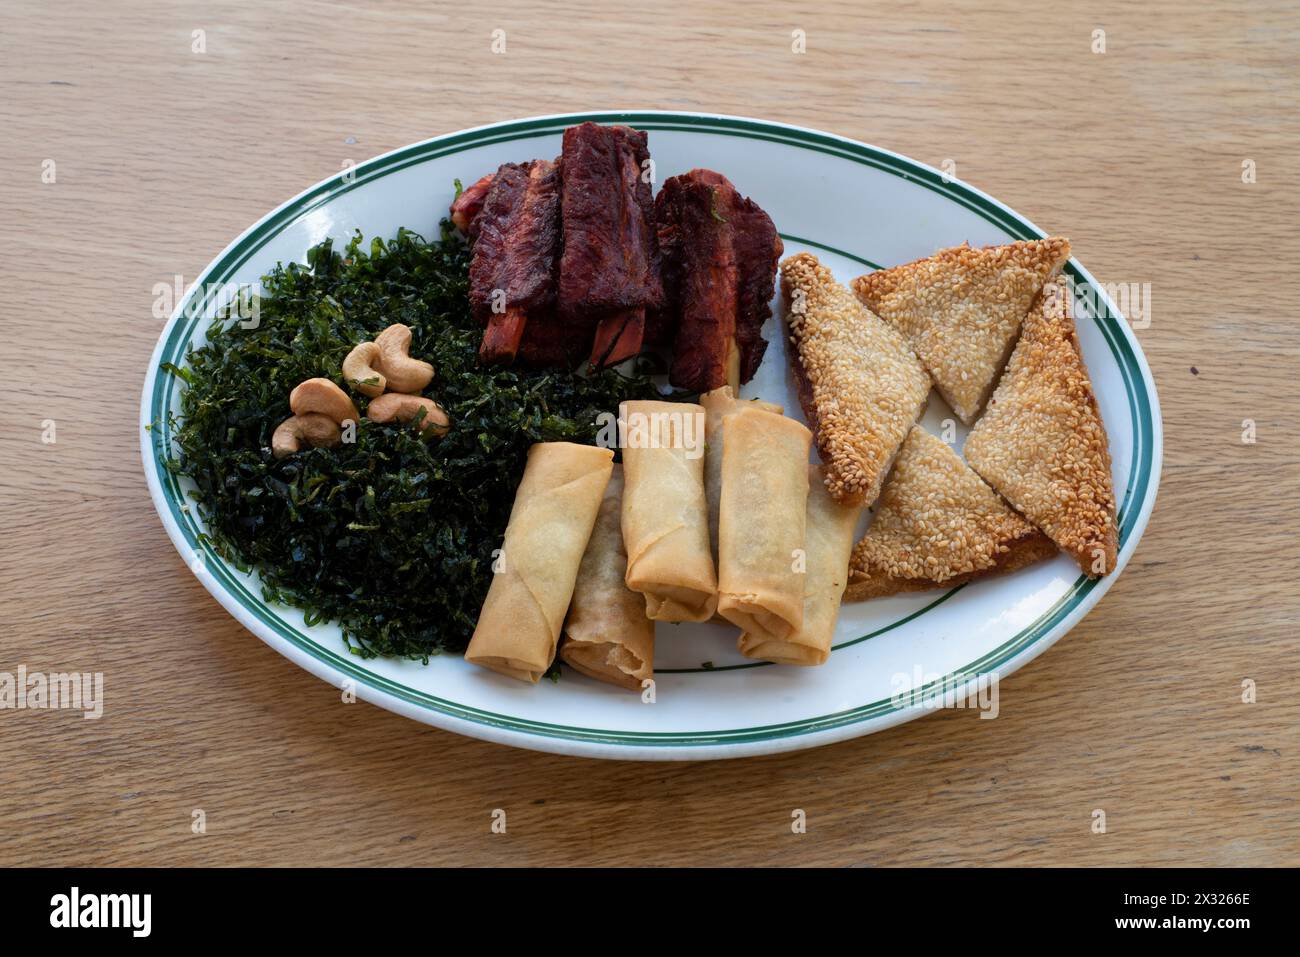 Chinese food : starters or sides with spring rolls, prawn toast, Chinese ribs and seaweed Stock Photo